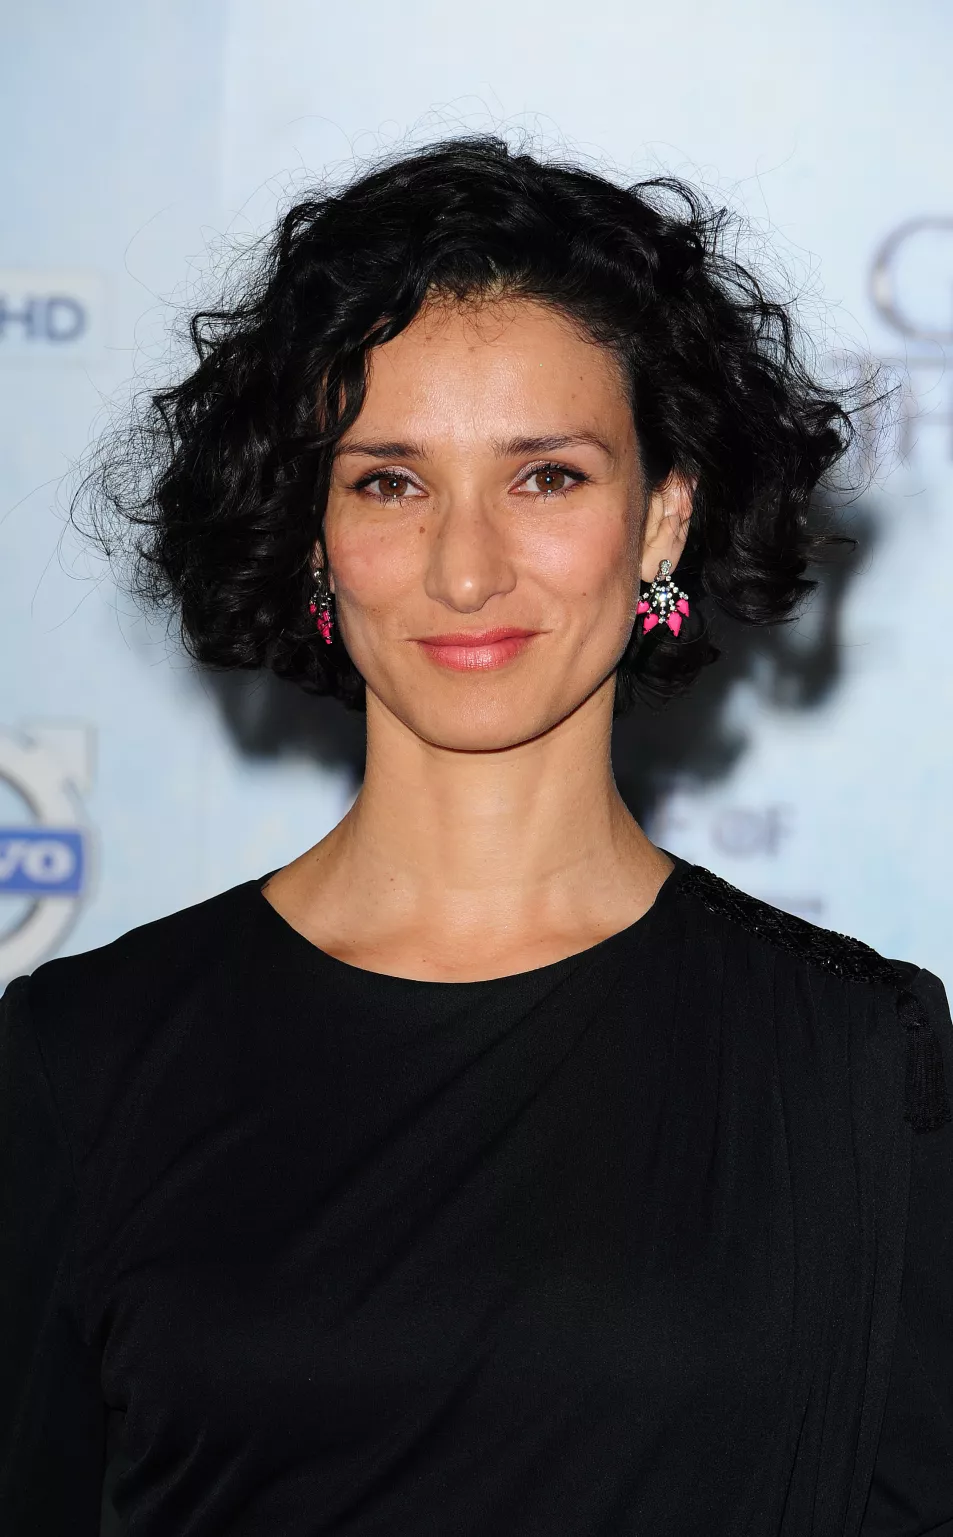 Indira Varma attending Sky Atlantic's premiere of the fourth season of Game of Thrones at The Guildhall, London.